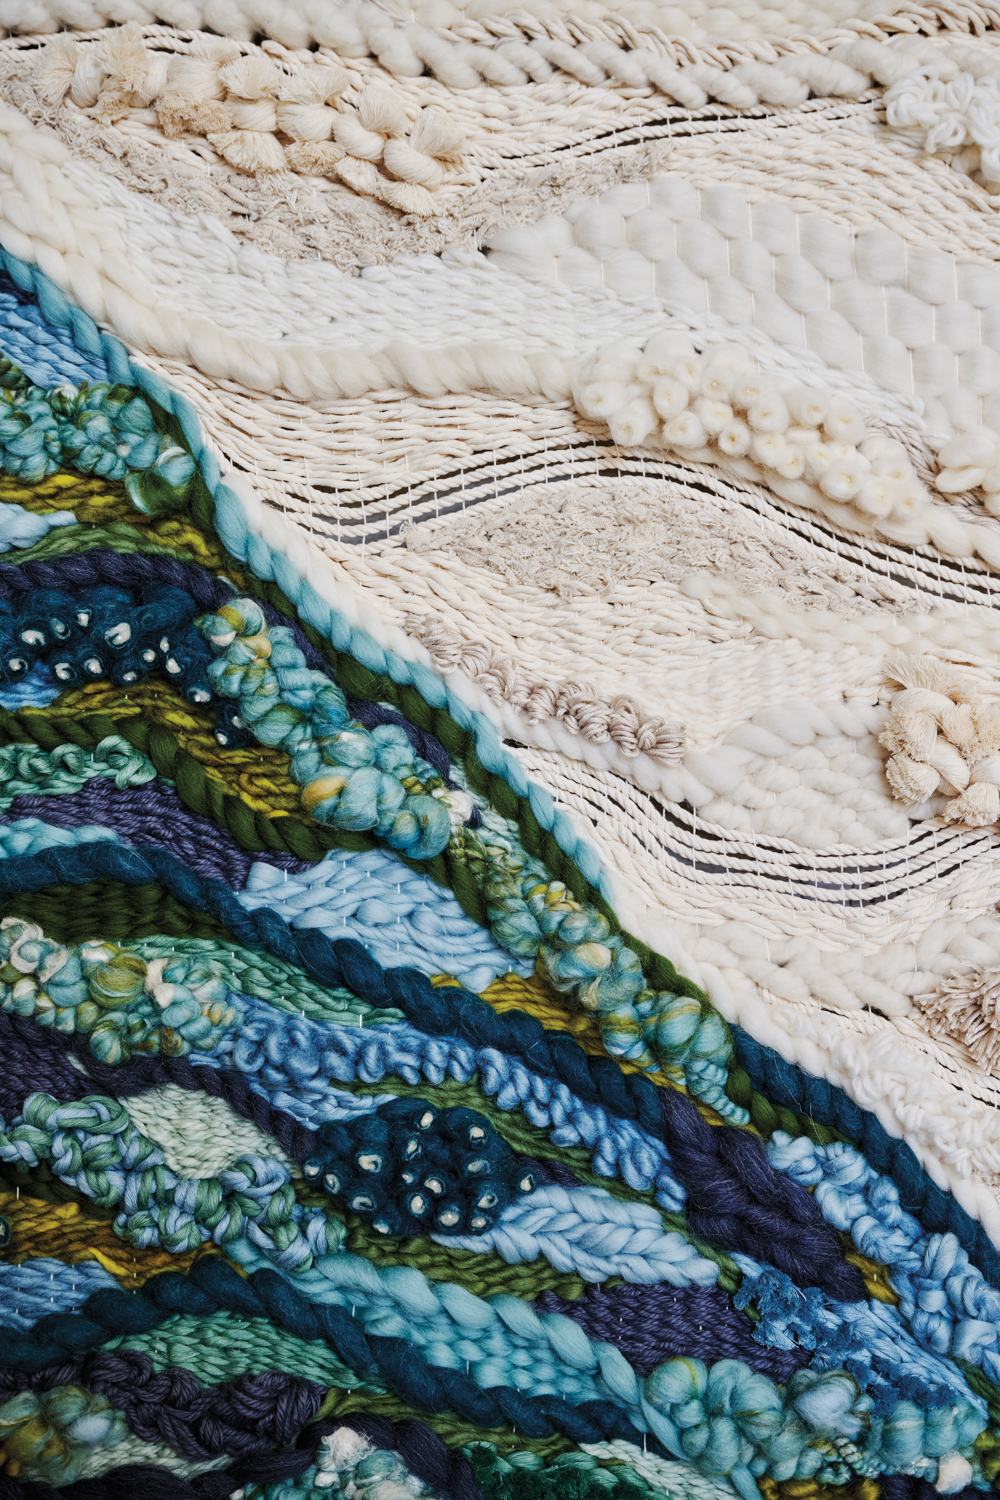 Shaylee Southerland’s woven fiber work with revealed vertical warp threads